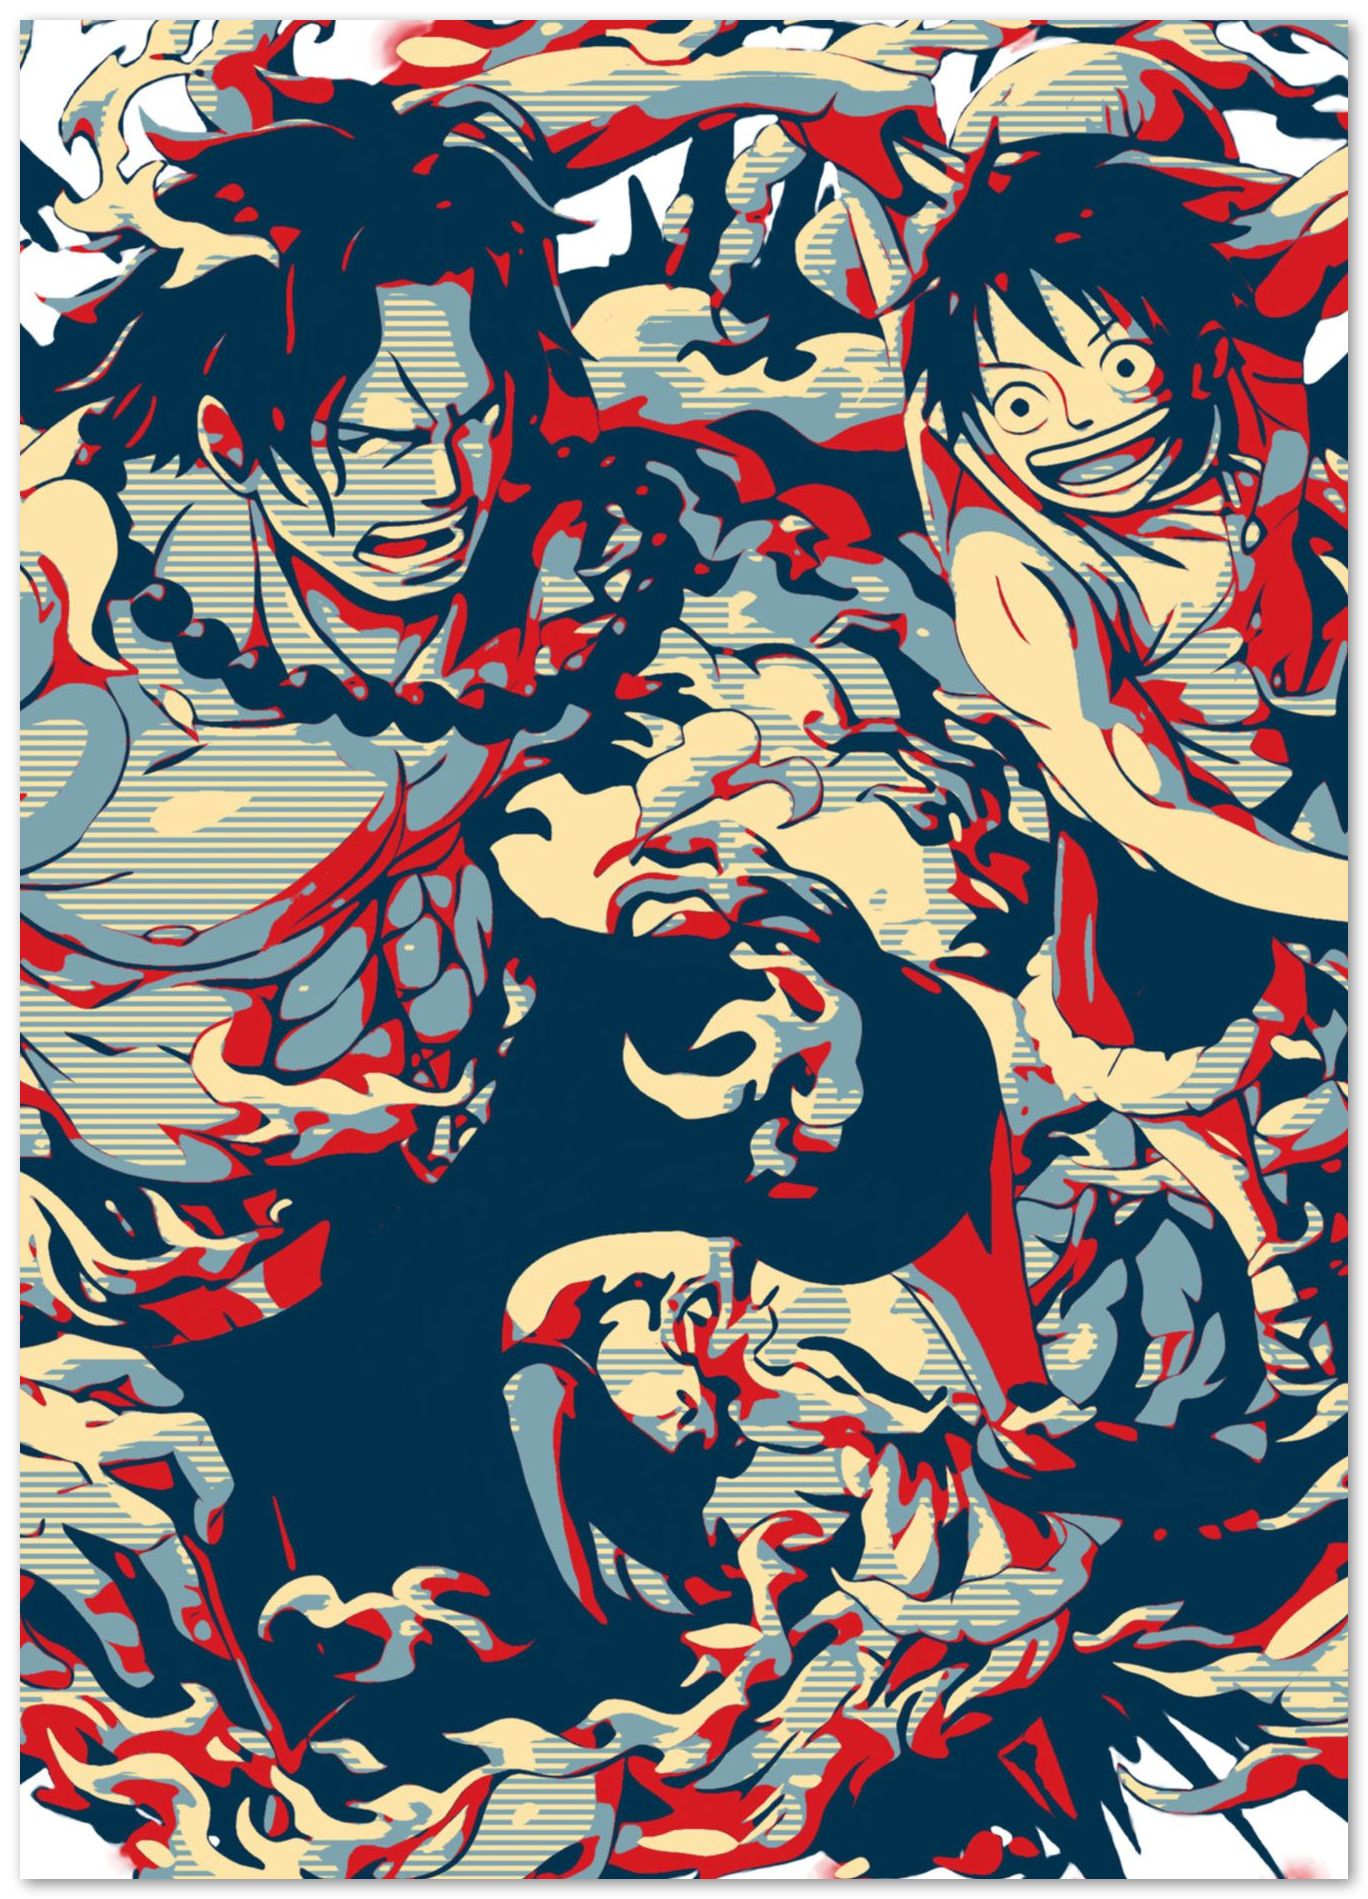 Ace x Luffy attack - @WoWLovers